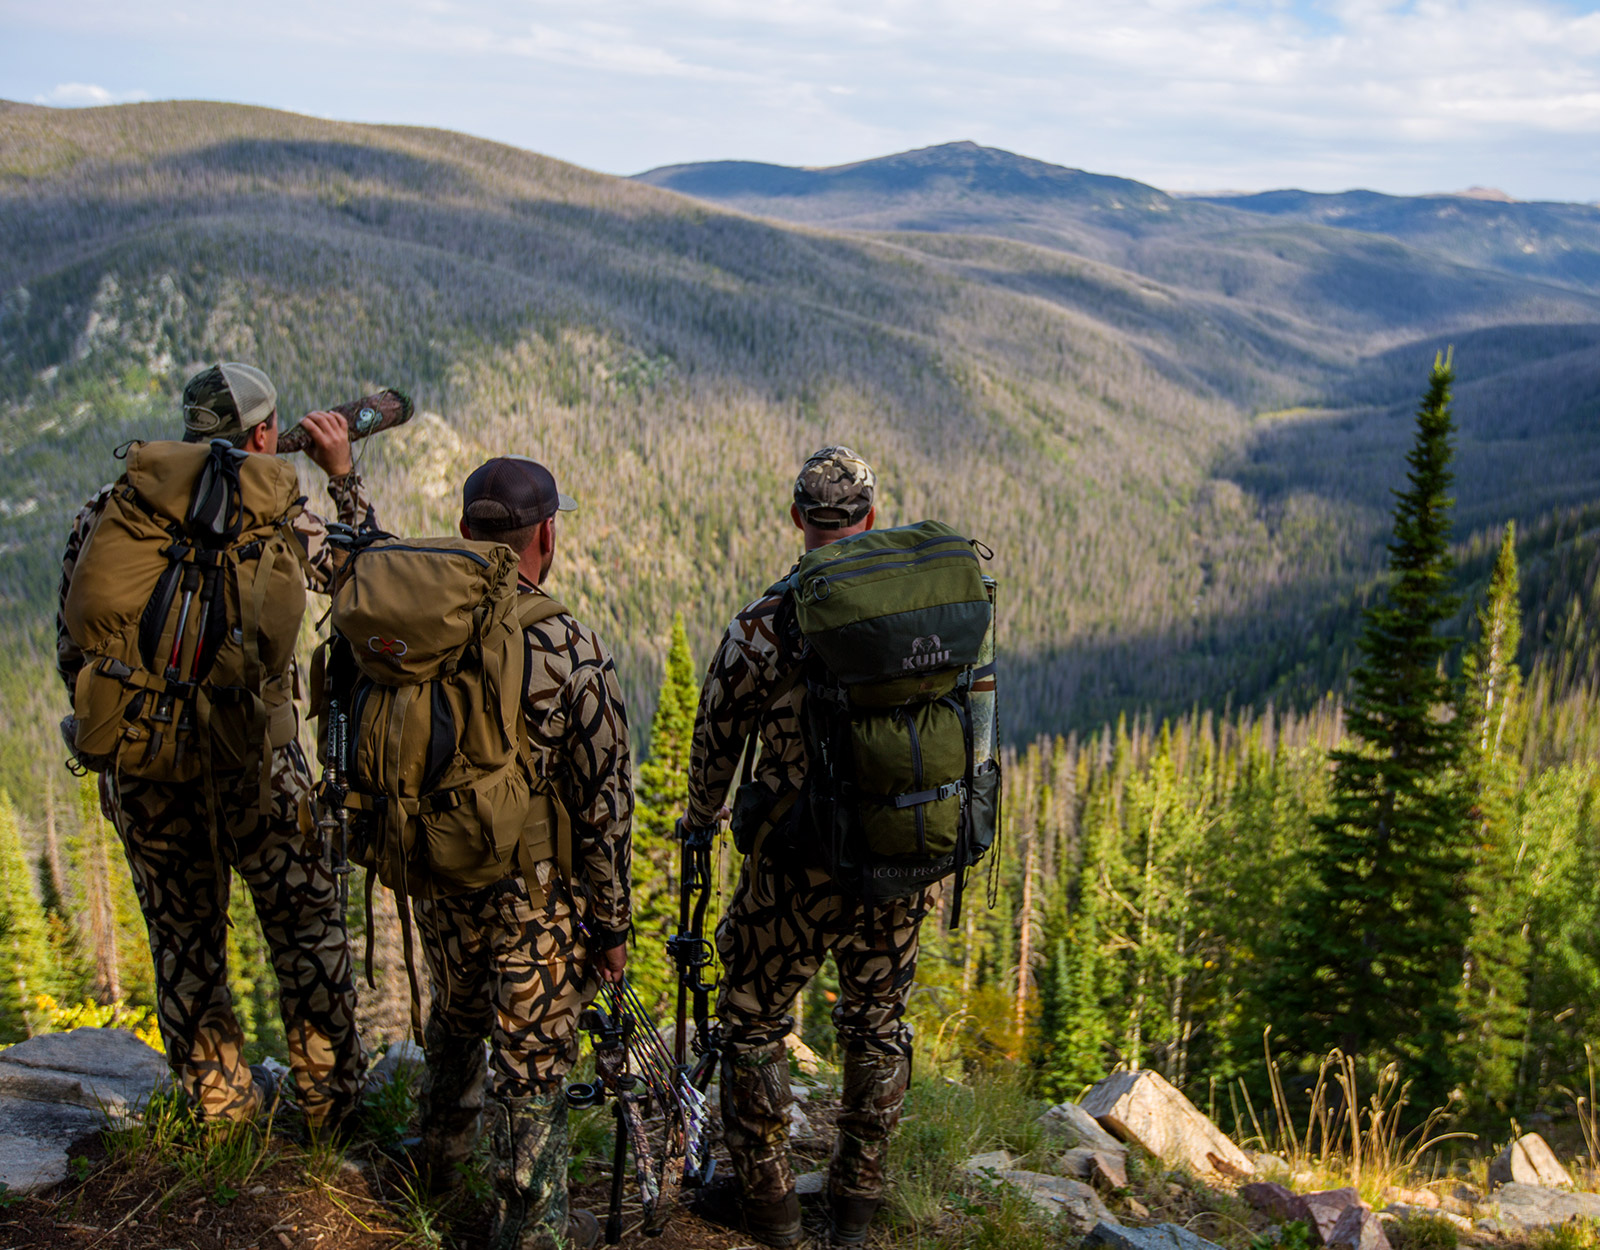 3 hunters looking over a mountain trail.